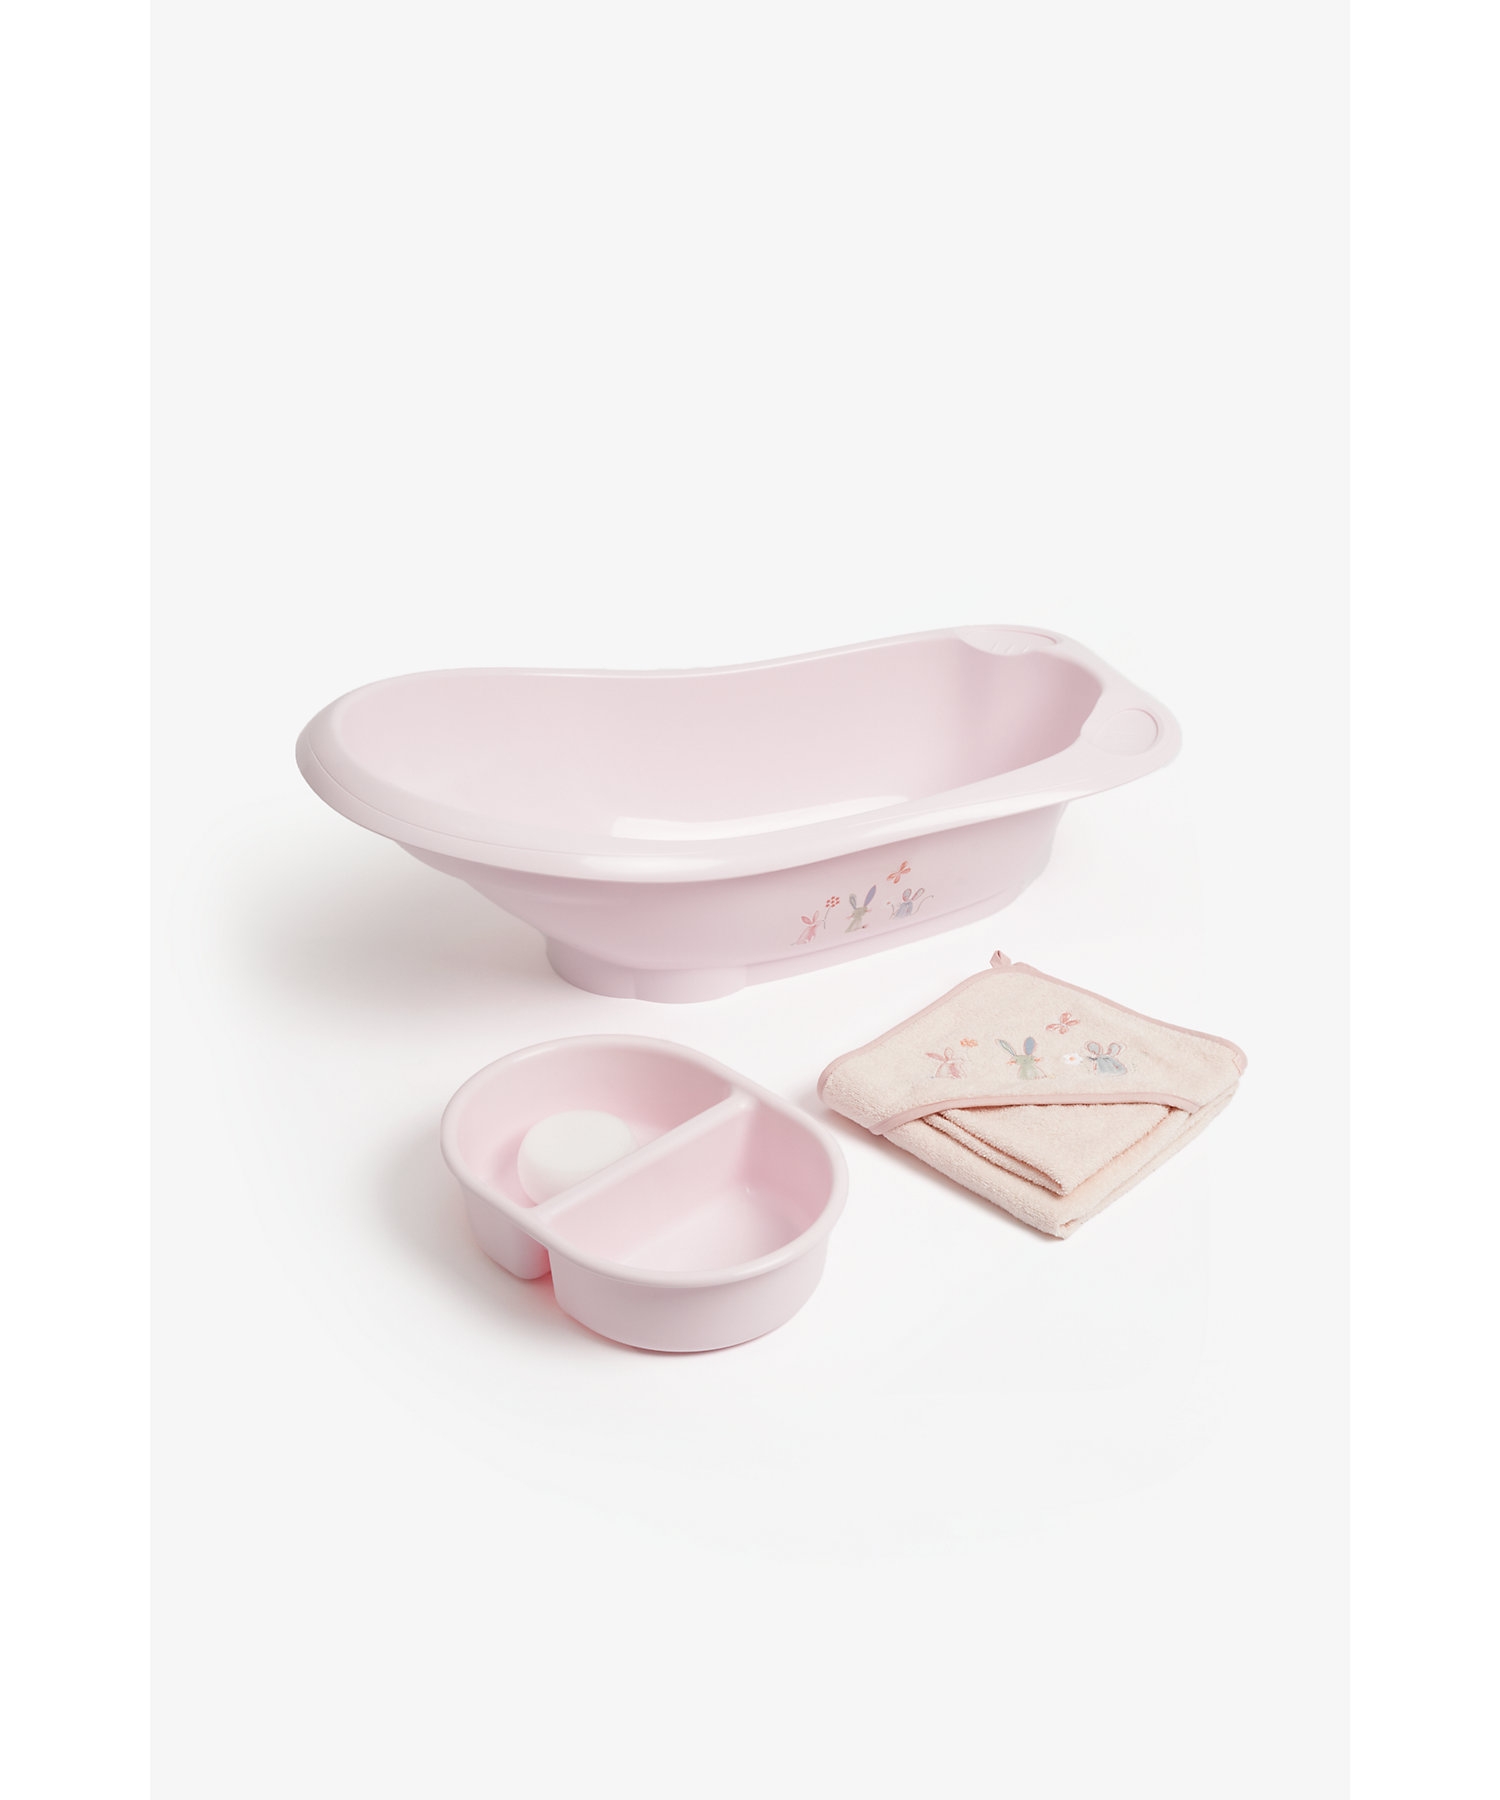 Mothercare | Mothercare Flutterby Bath Set Pink 